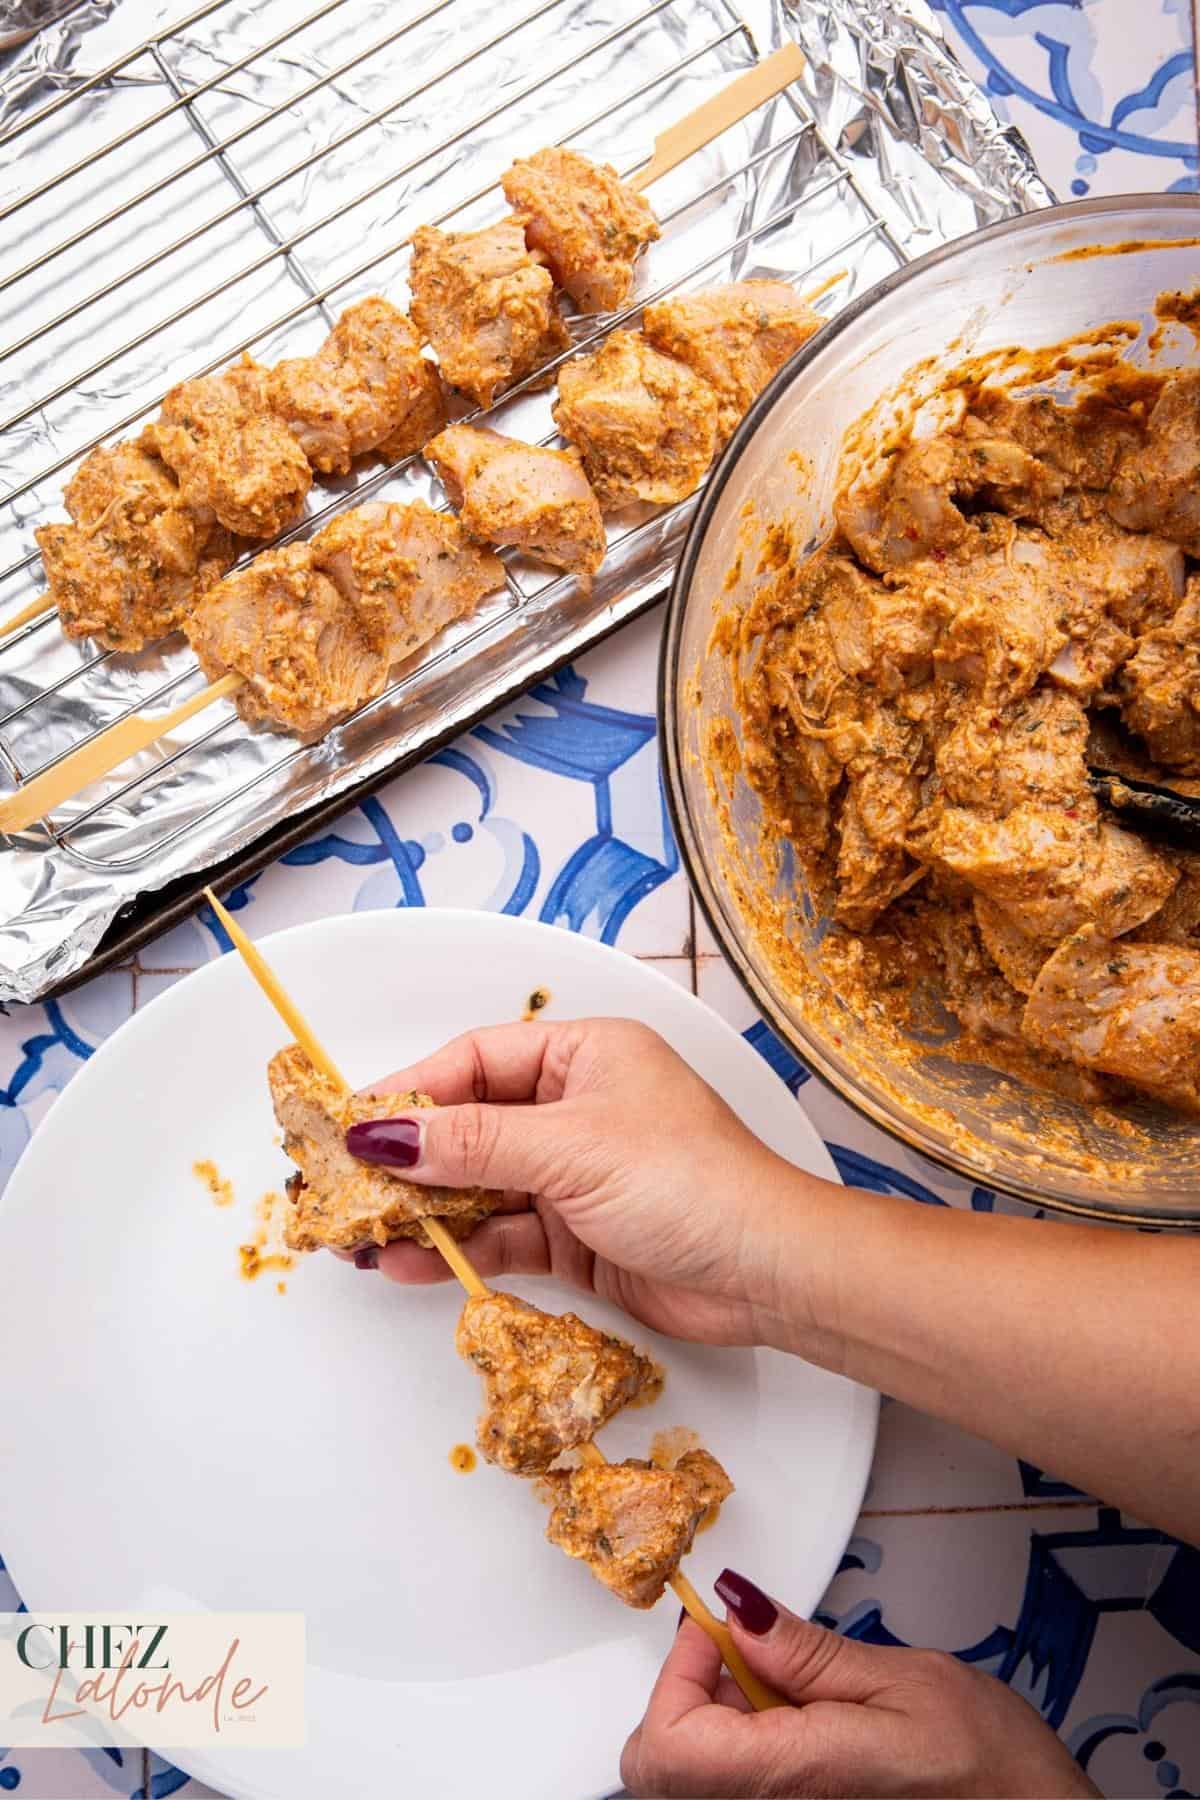 Once they are done soaking, take out the marinated chicken from the fridge and thread them onto the skewers. Make sure not to pack them too tightly and leave a little room between each piece for even cooking.